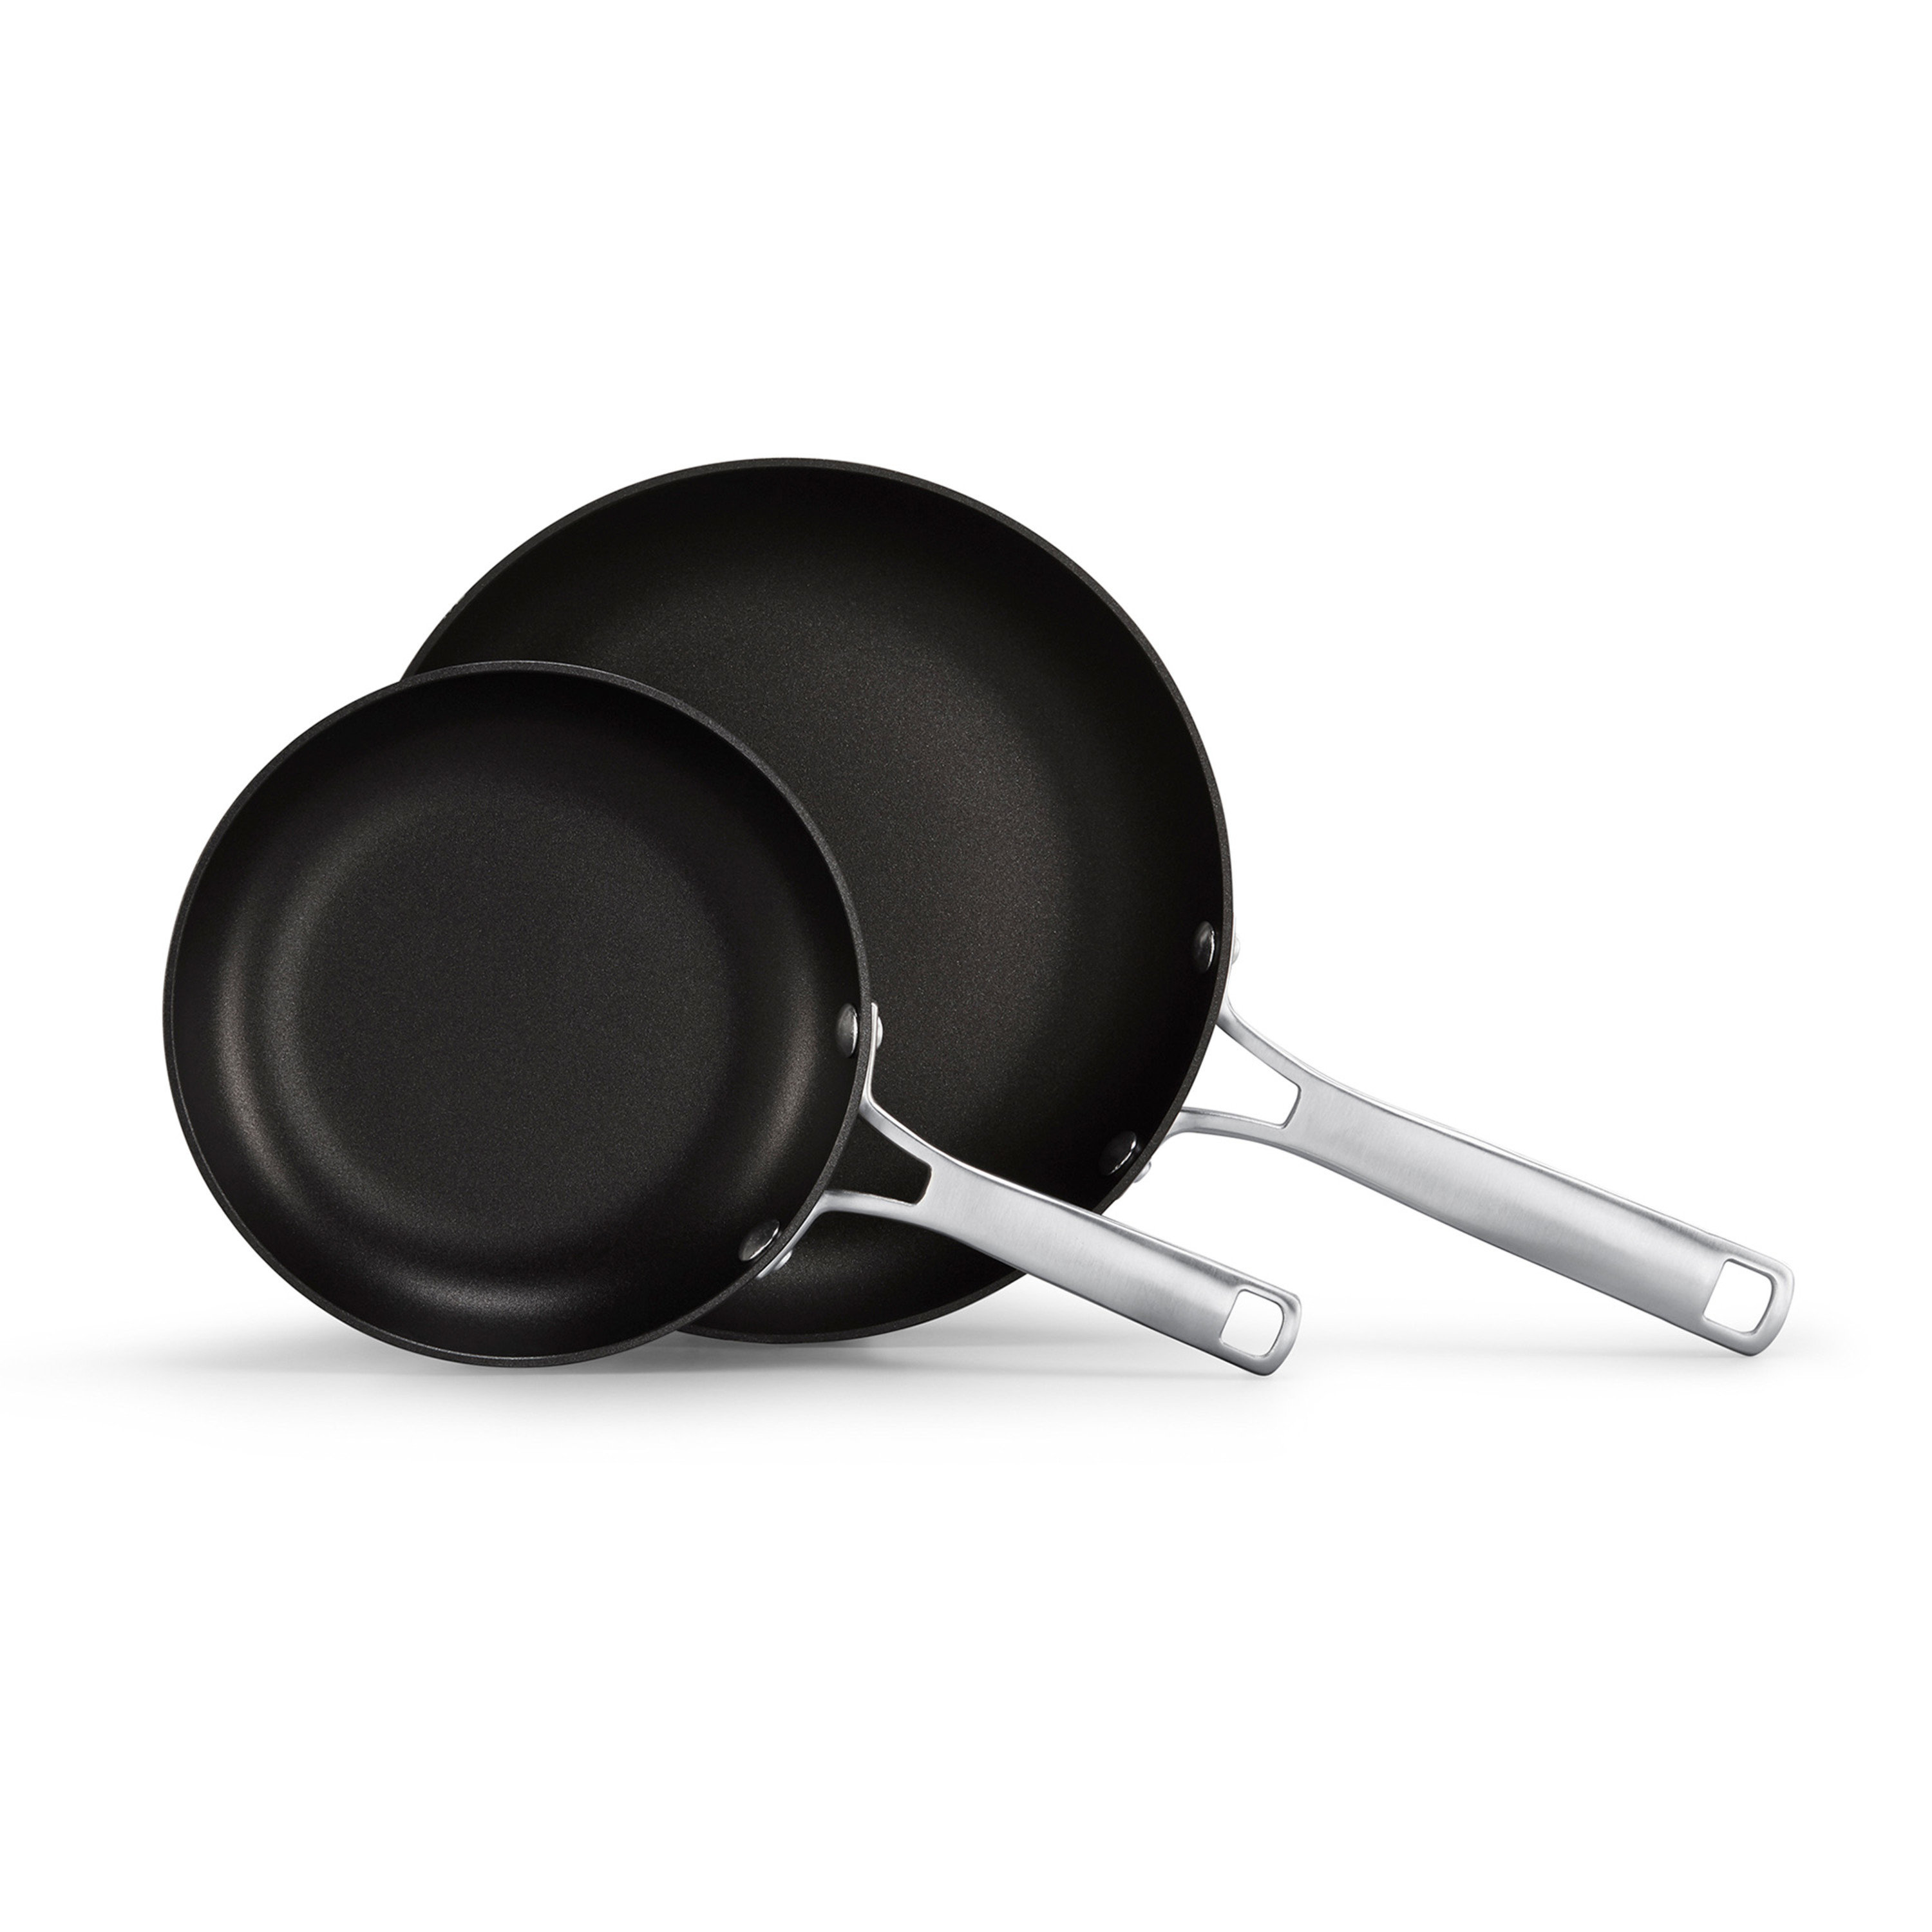 Calphalon 13 Non Stick Hard-Anodized Aluminum 2 Piece Specialty Pan with  Lid & Reviews